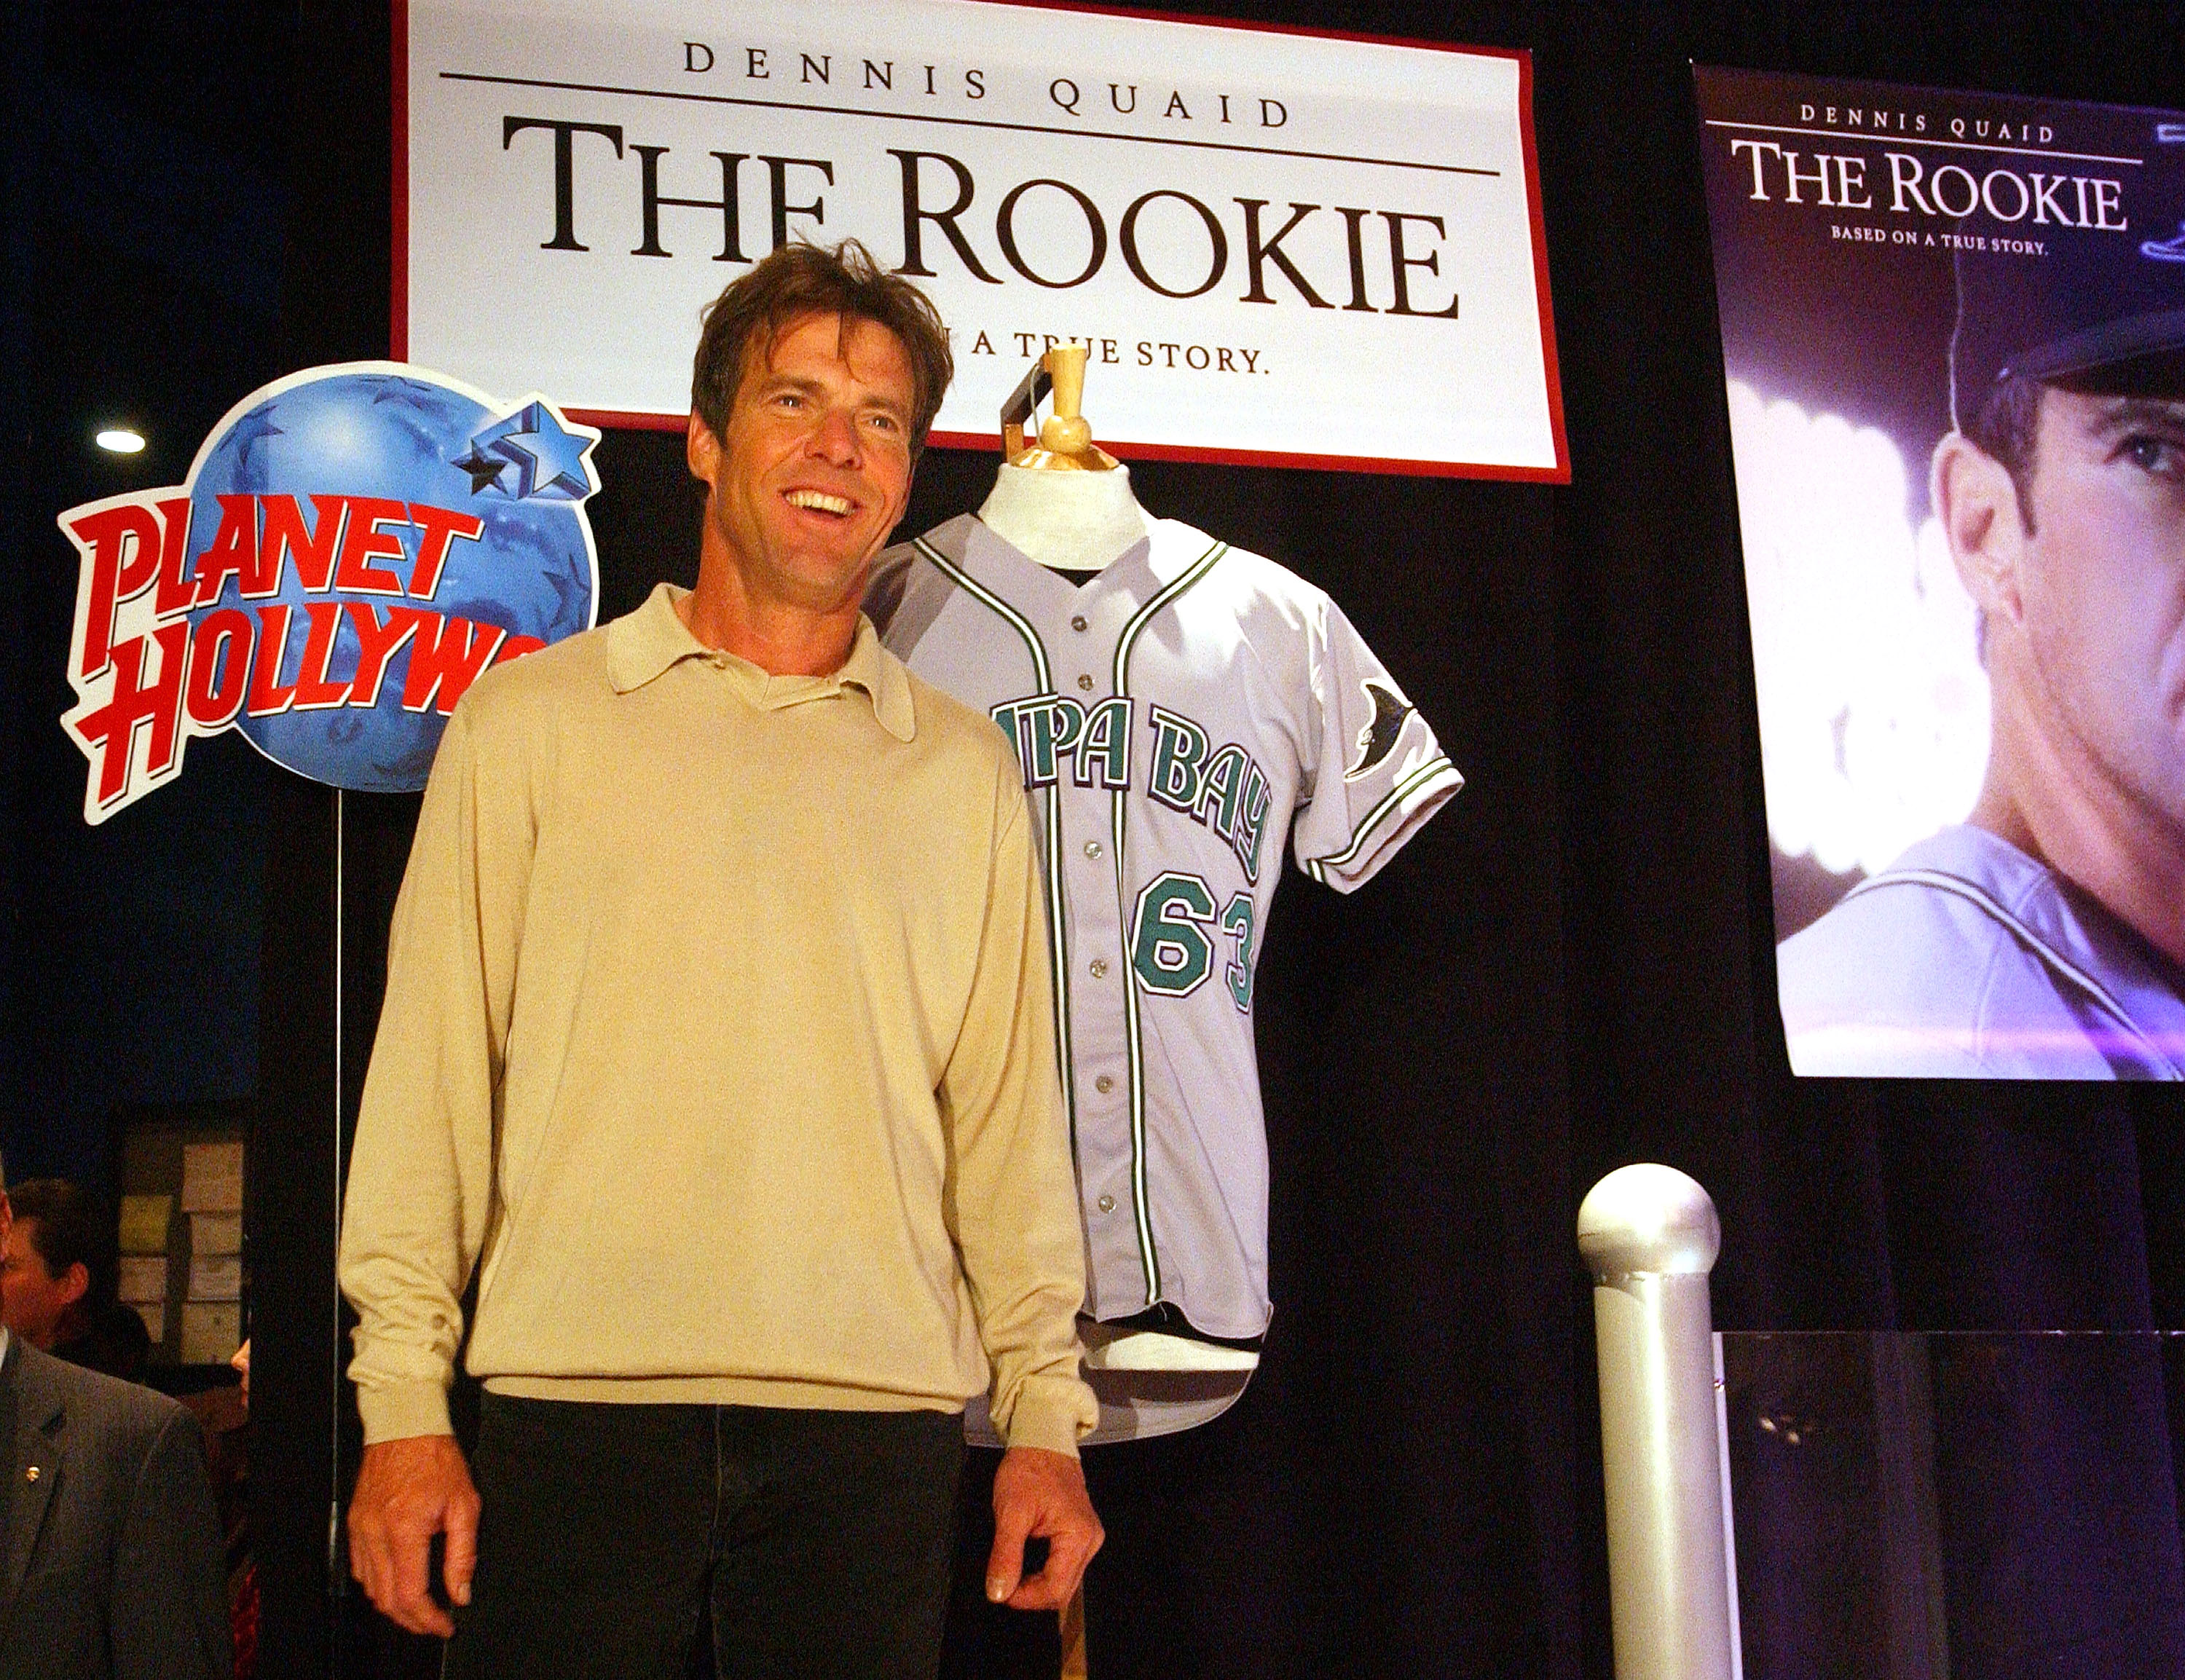 Actors And Baseball Players Come Out To Promote “The Rookie”